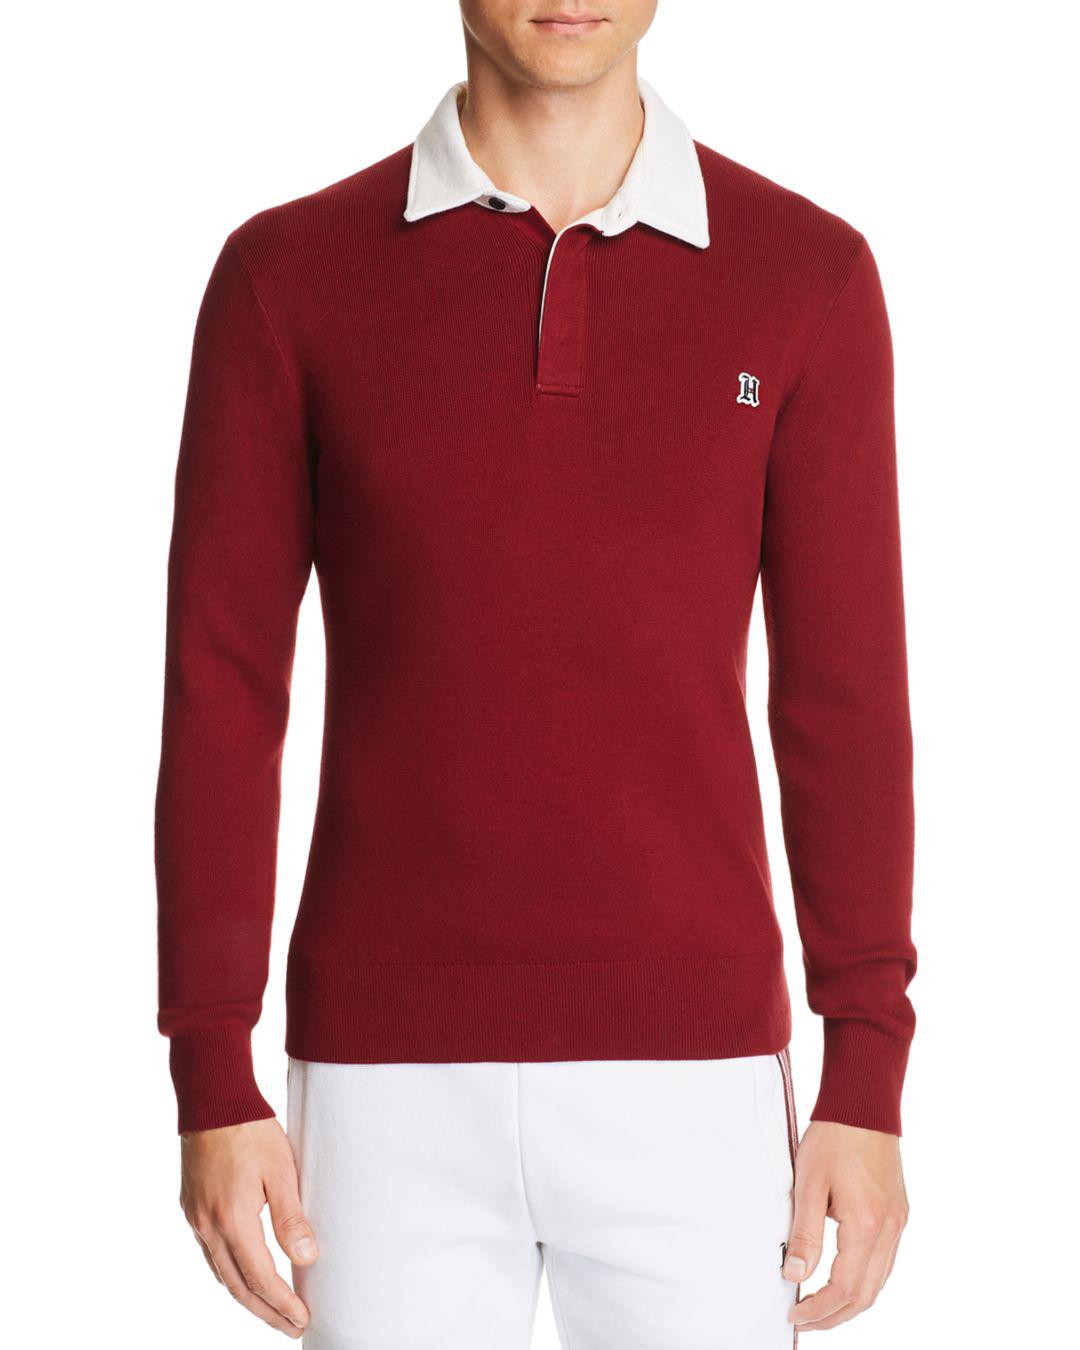 Tommy Hilfiger X Lewis Hamilton Sweater in Red for Men - Lyst